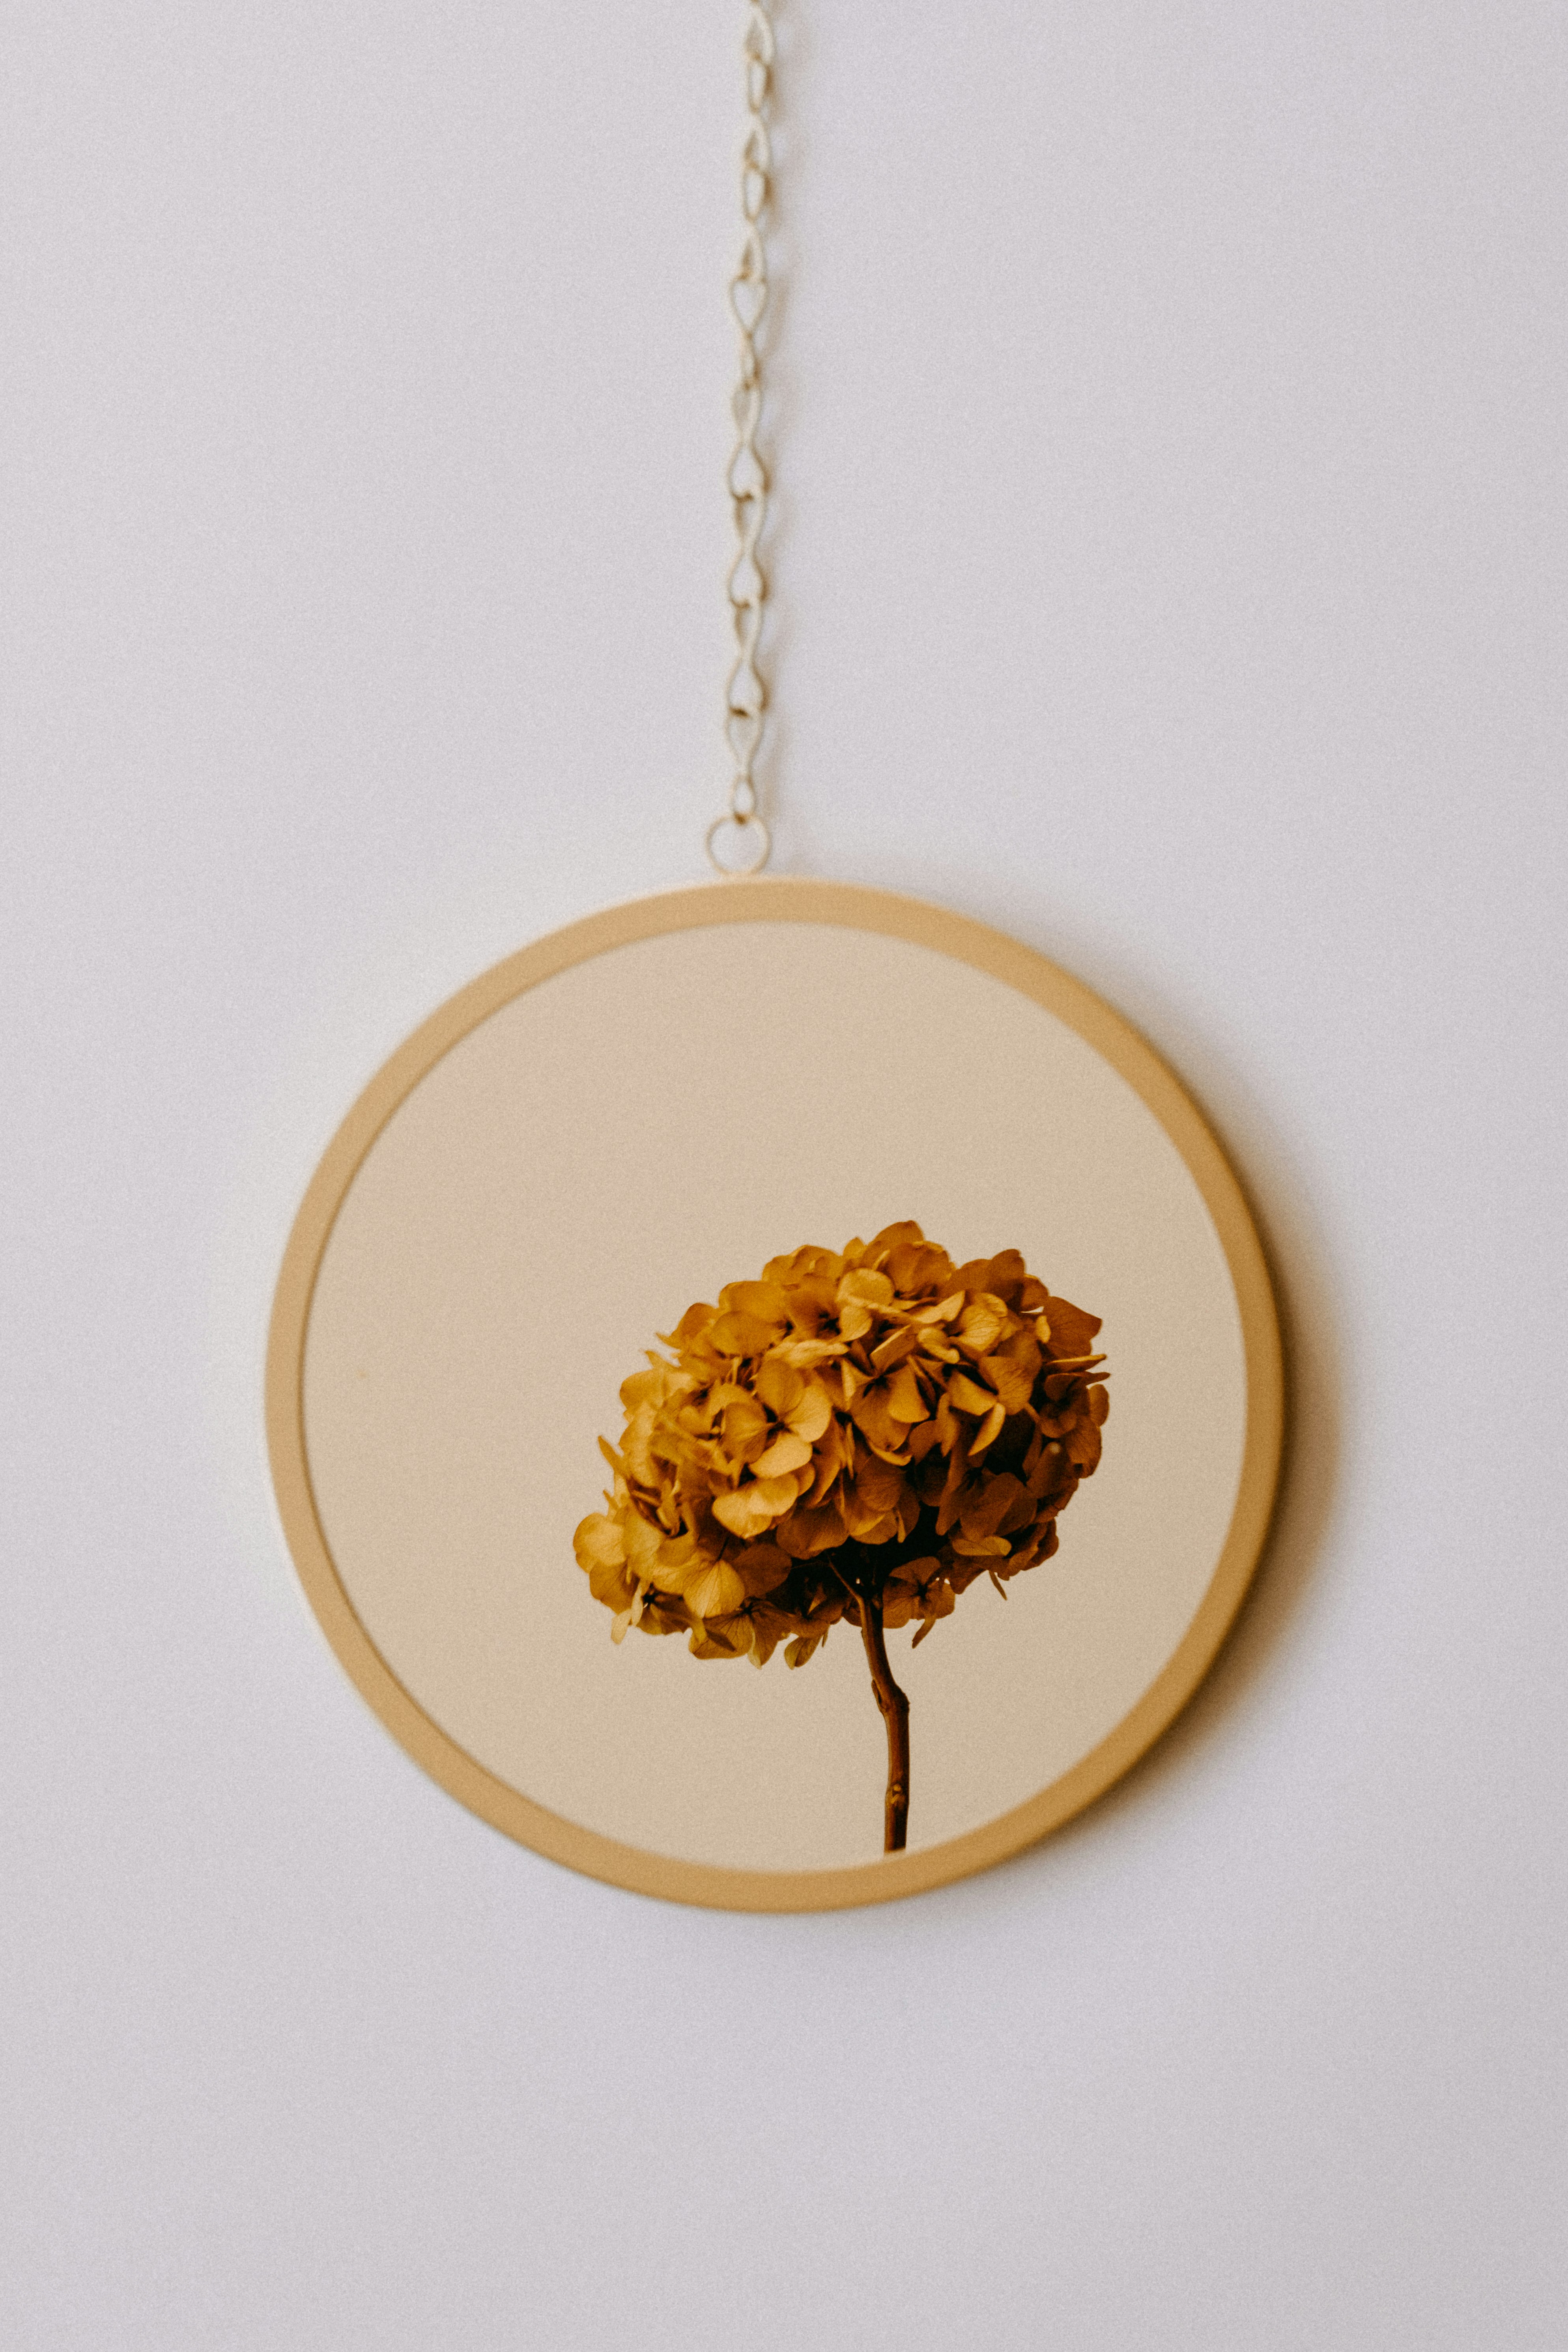 brown and white floral round hanging decor